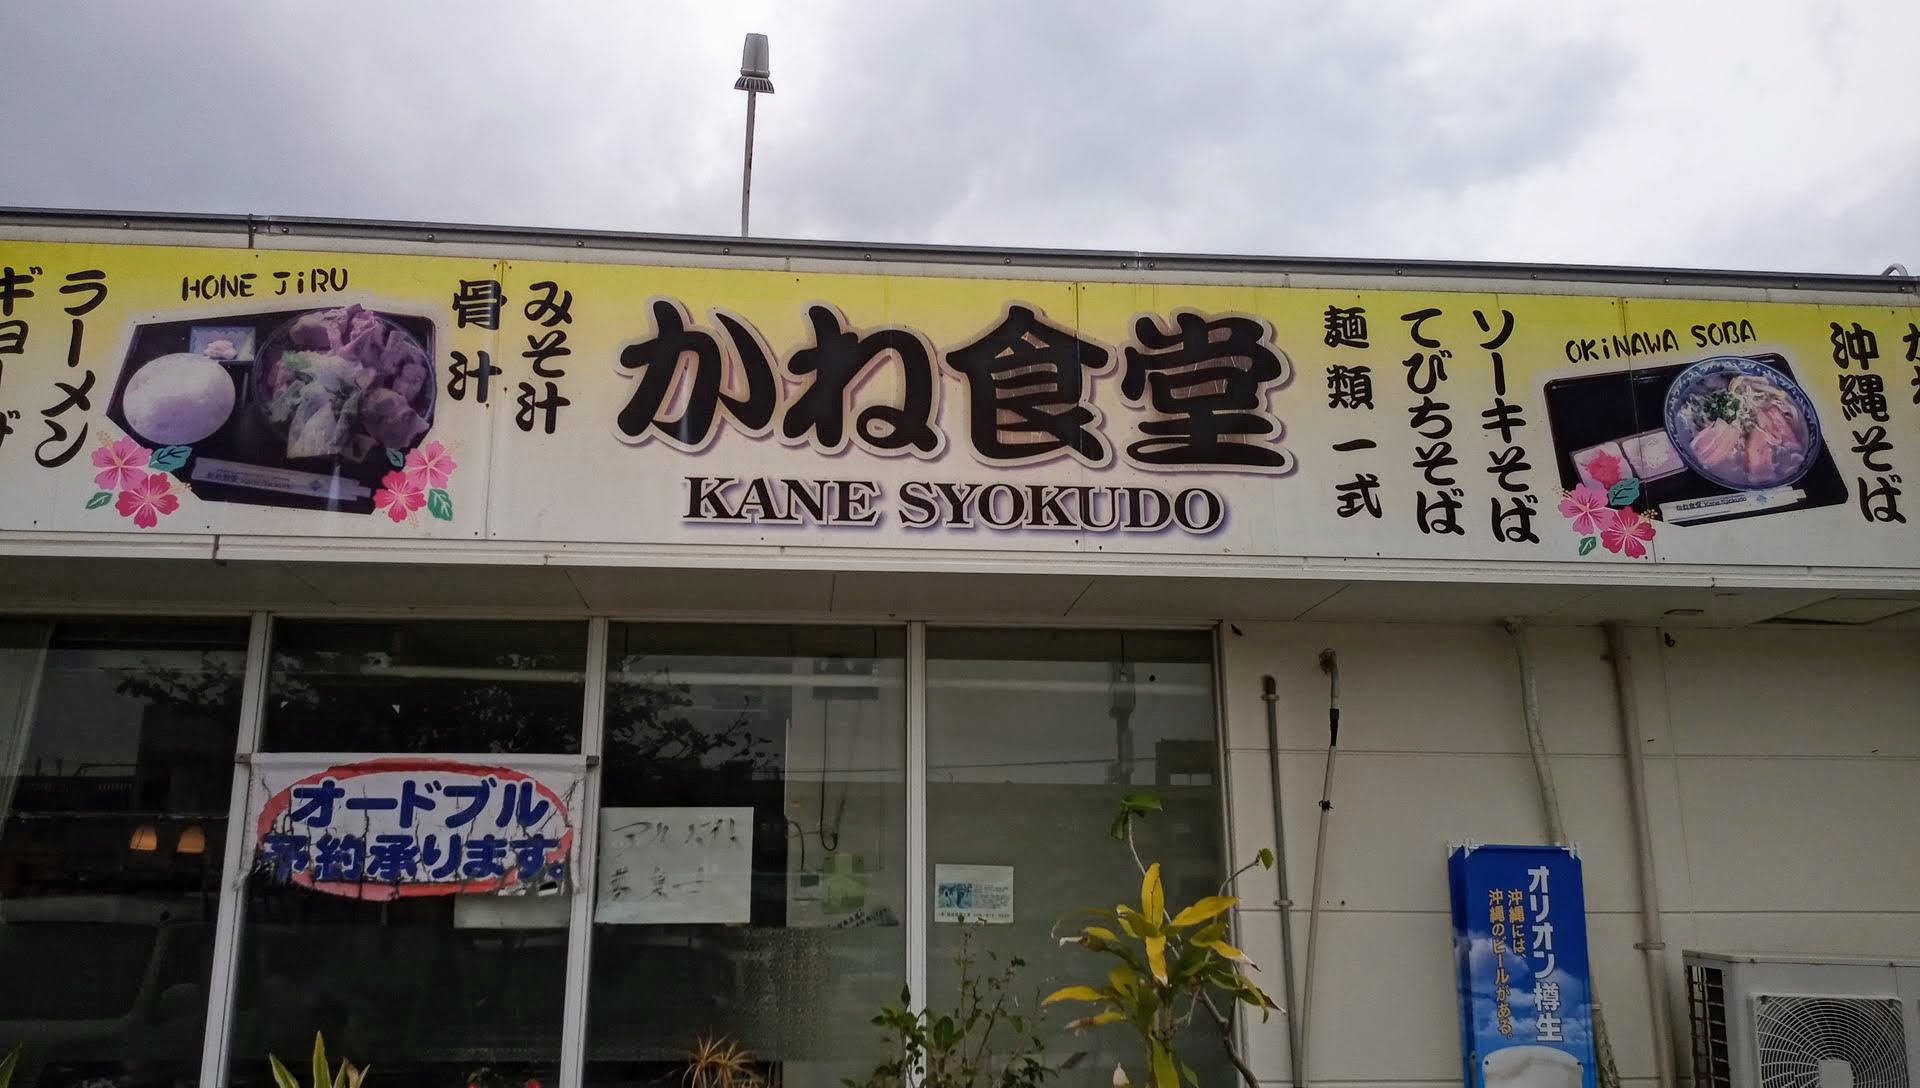 If you drive to the underwater road, Kane Shokudou is recommended Delicious and full volume